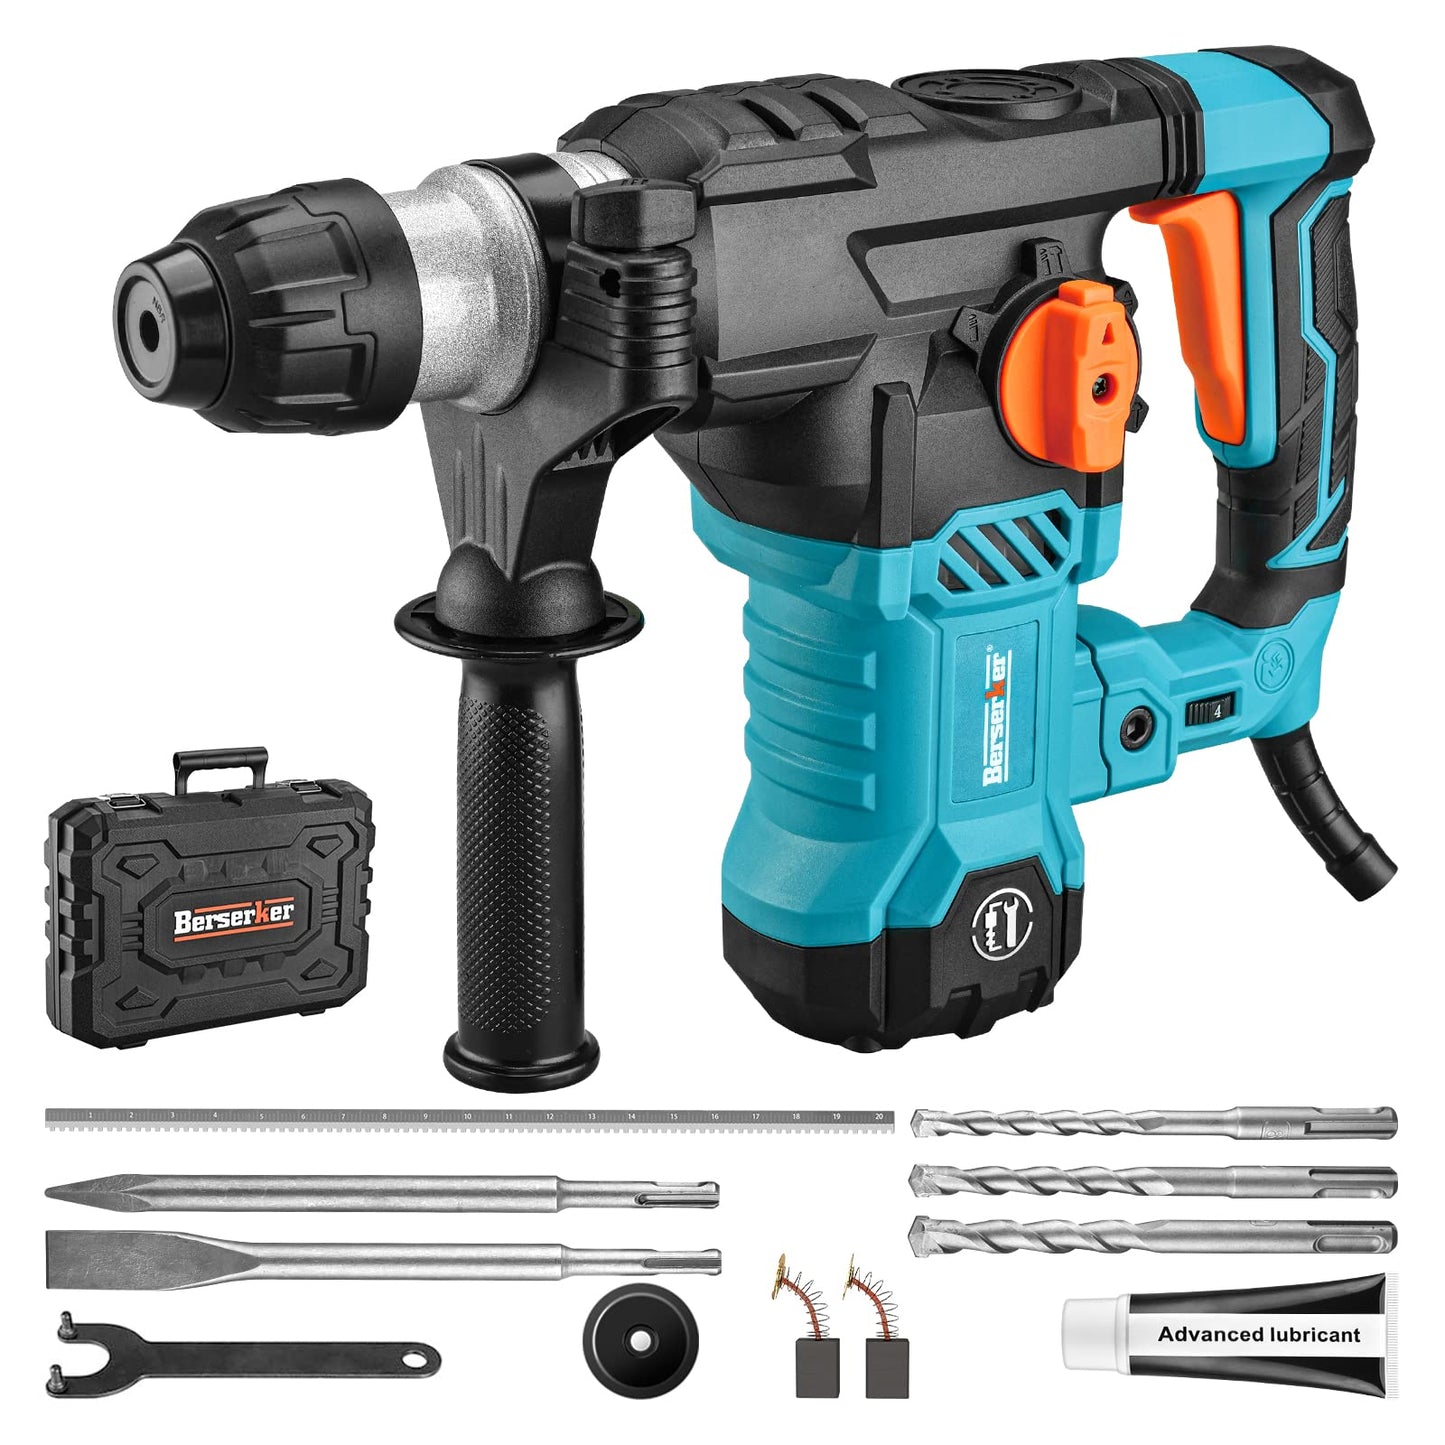 Berserker 1-1/4" SDS-Plus Rotary Hammer Drill with Vibration Control,Safety Clutch,12.5 Amp 4 Functions Corded Rotomartillo for Concrete-Including 3